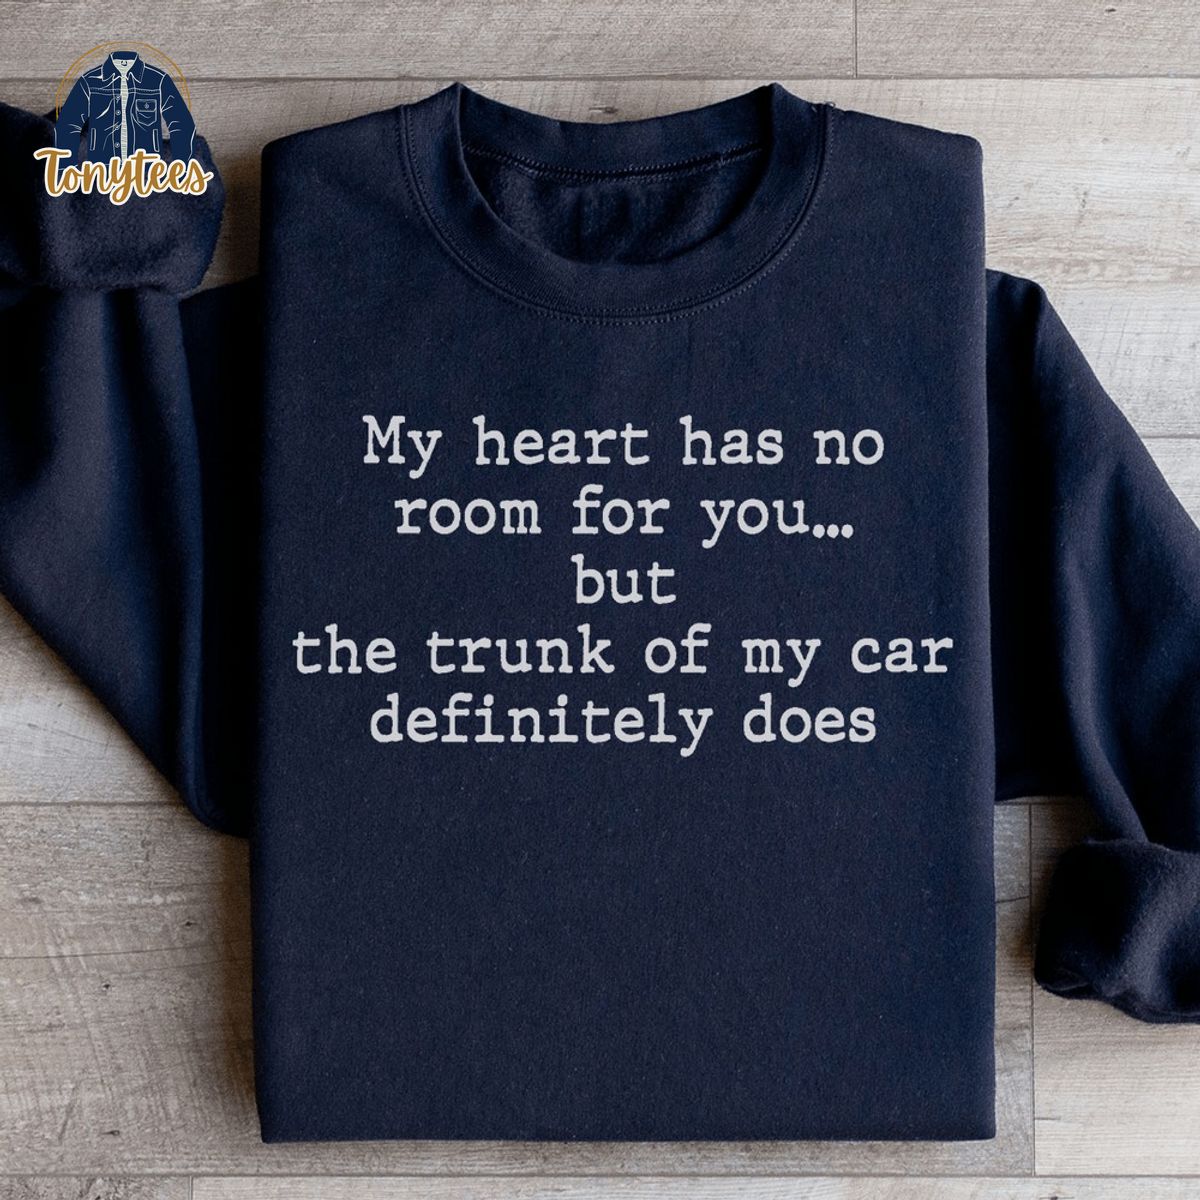 Me heart has no room for you but the trunk of my car definitely does shirt